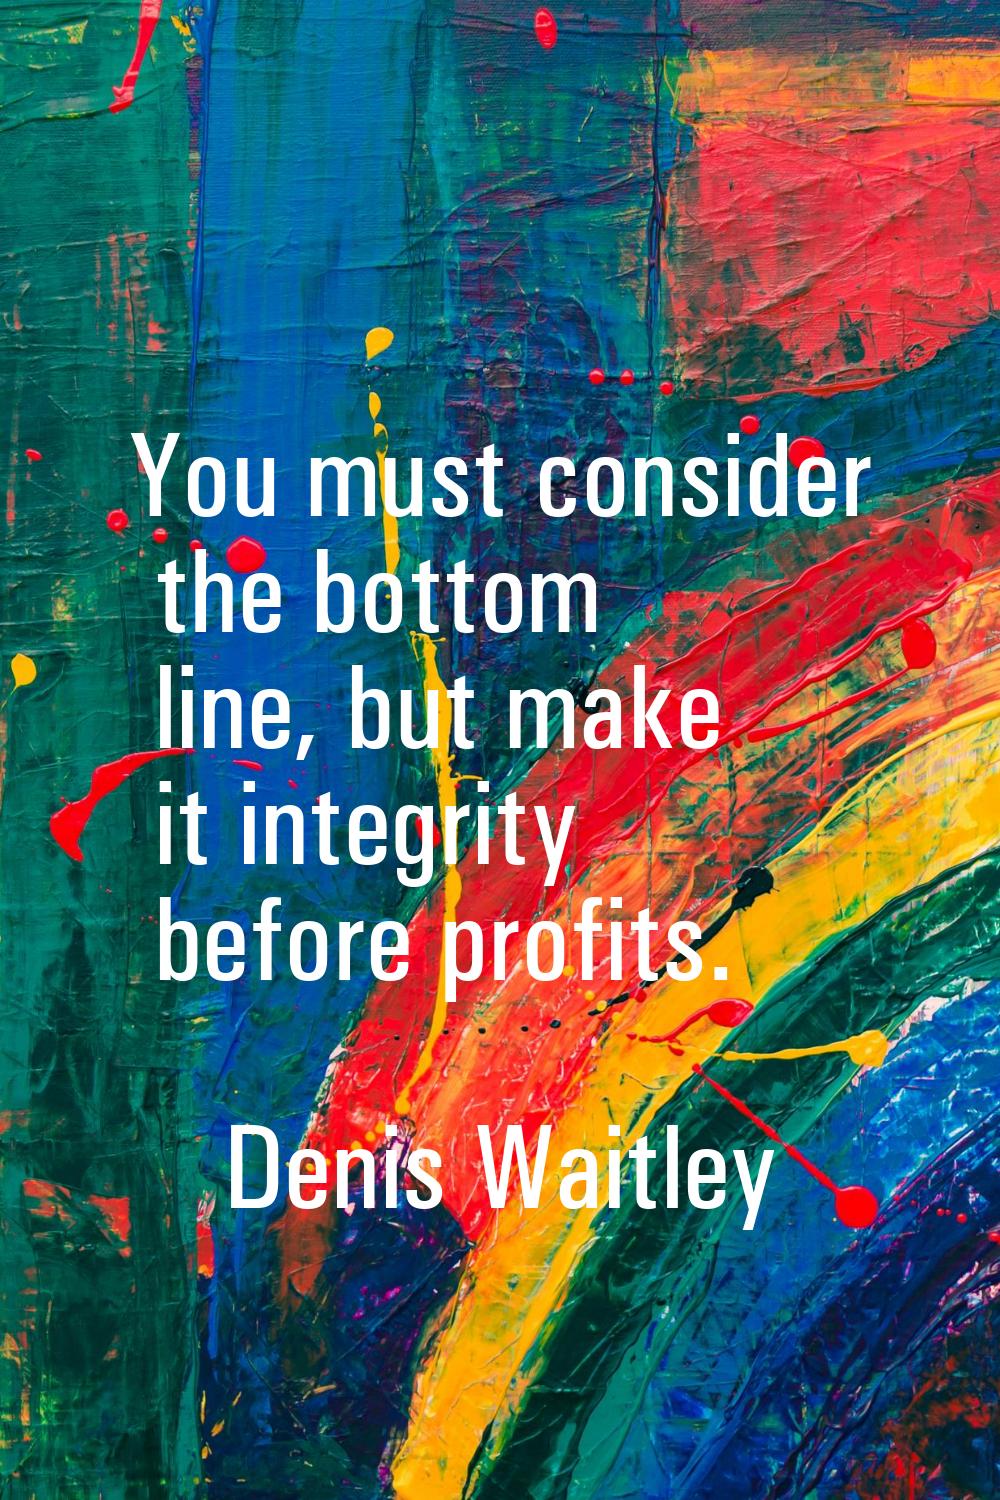 You must consider the bottom line, but make it integrity before profits.